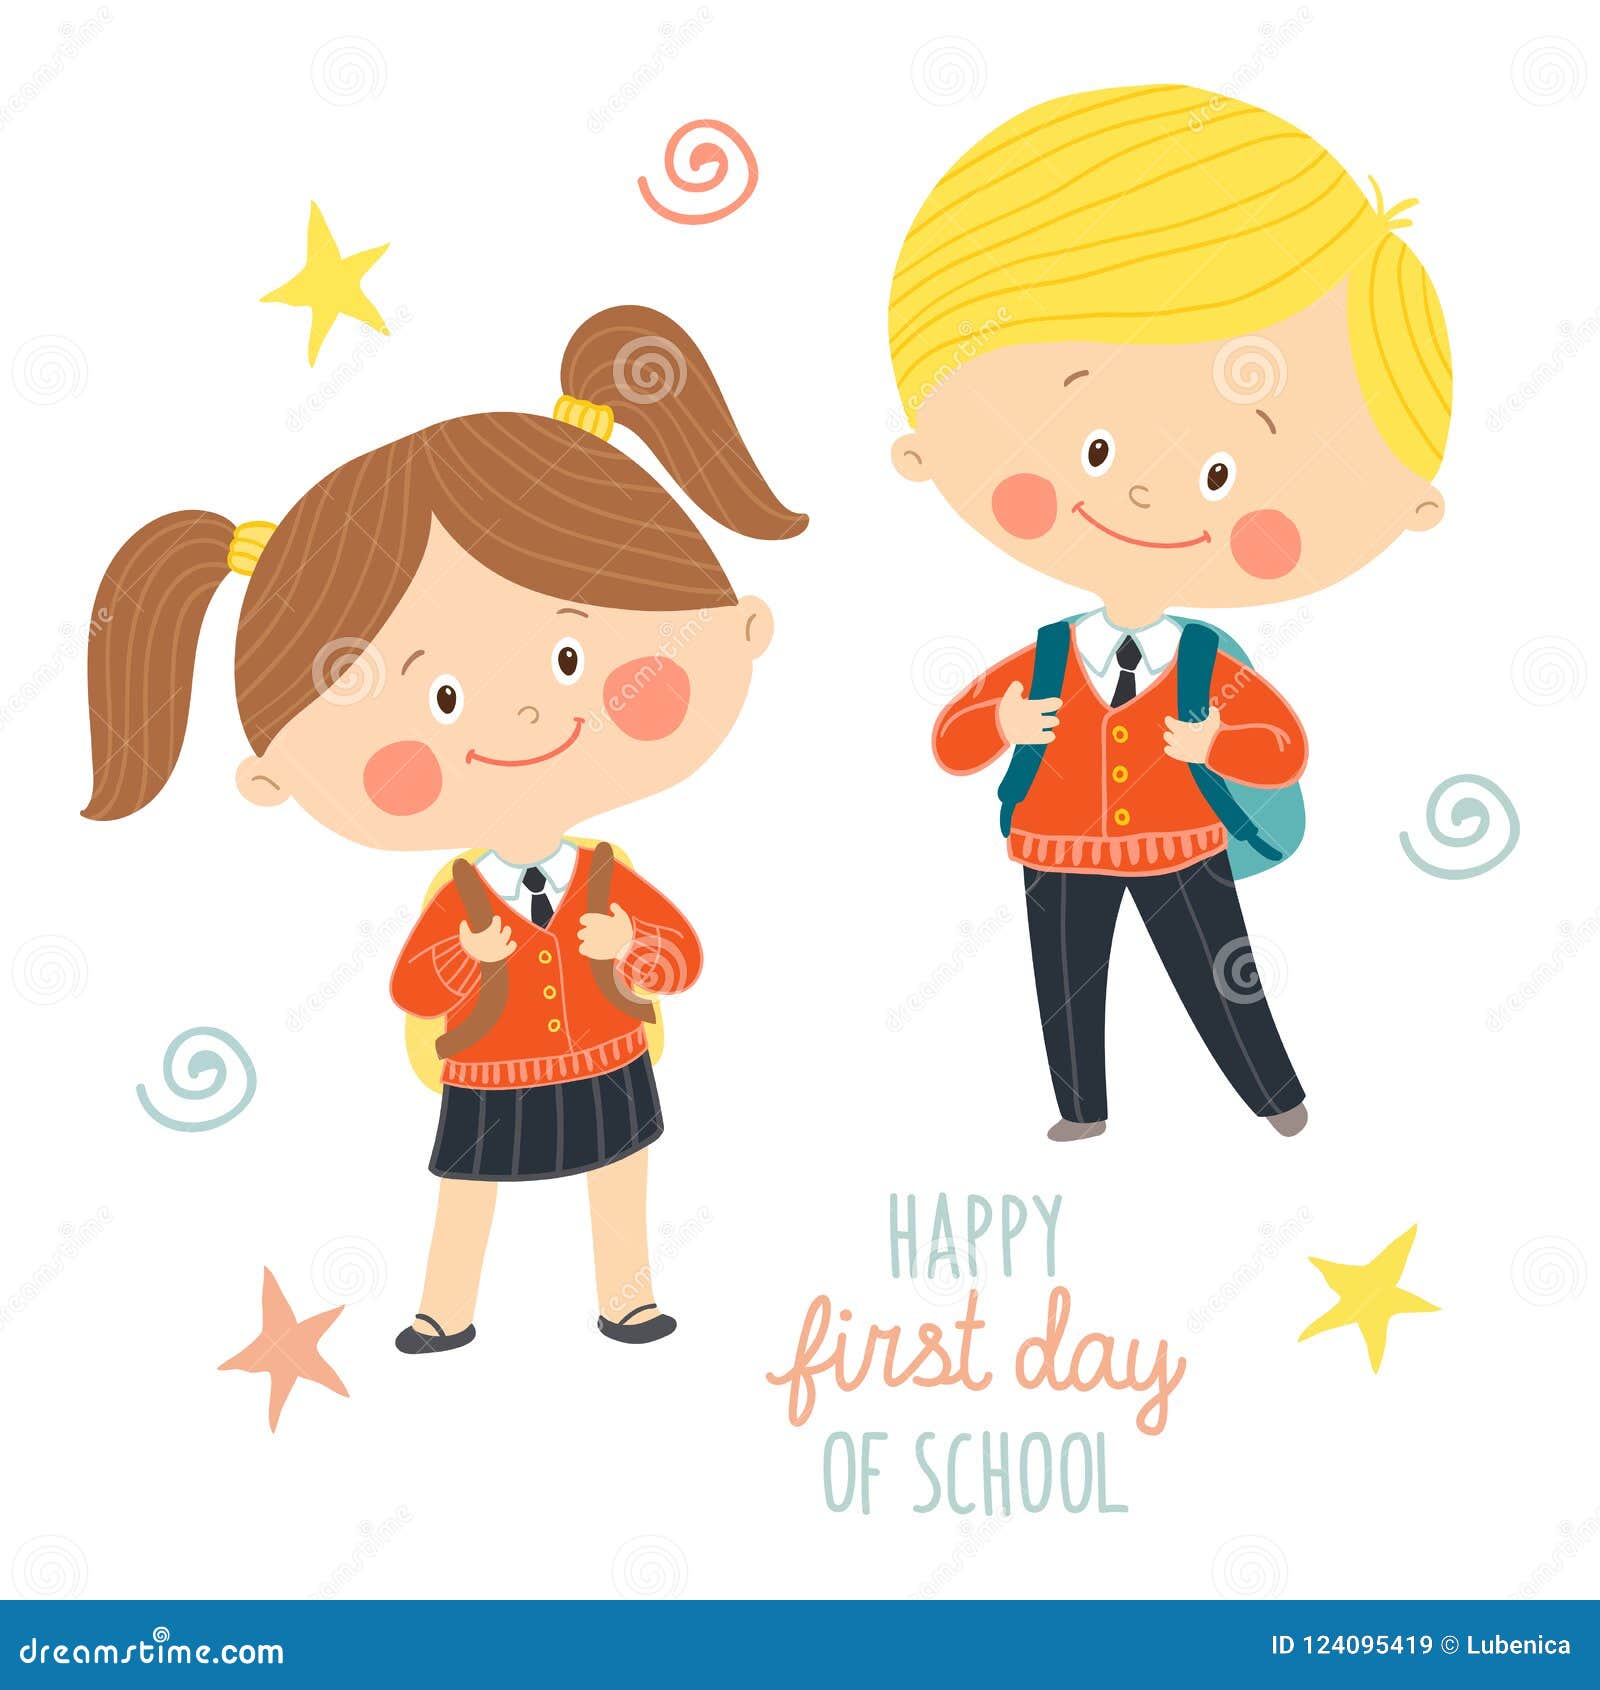 Funny Hand Drawn Kids in School Uniforms with Schoolbags. Cute Boy and ...